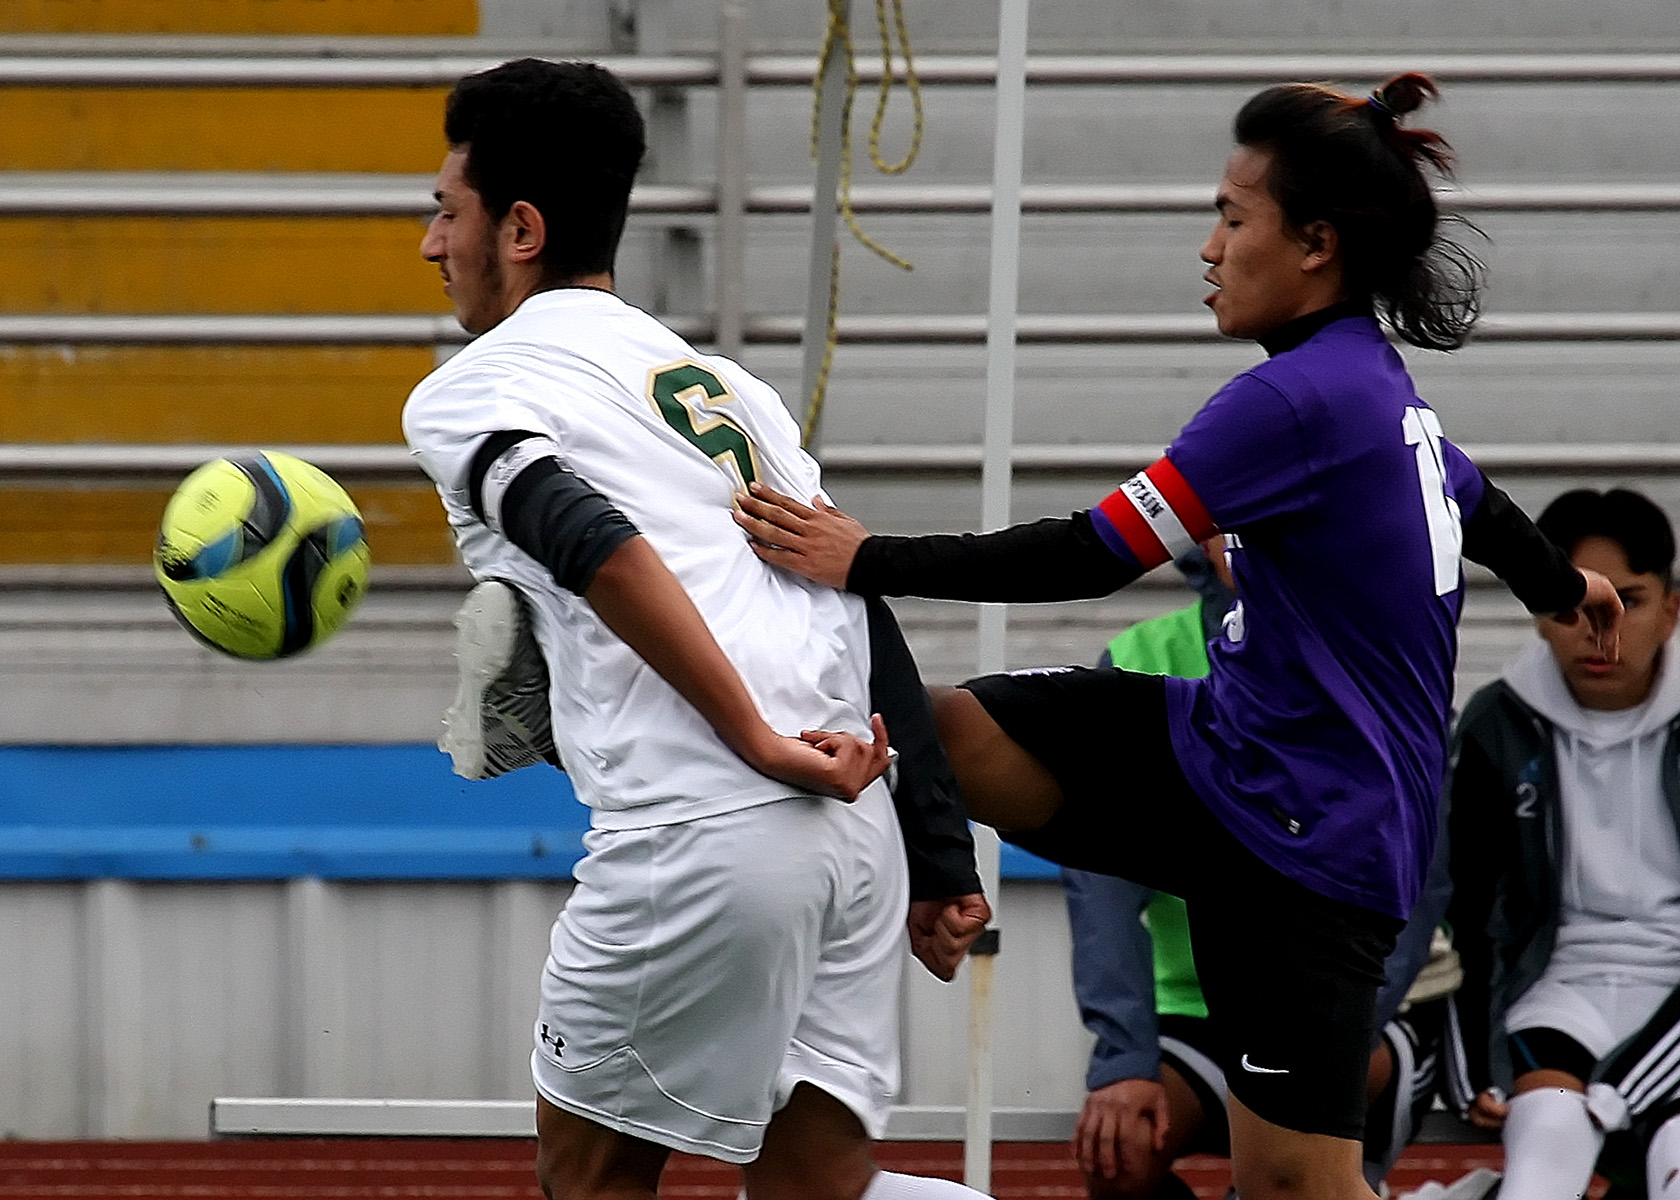 James Mung of Foster kicks Evergreen's Elias Robles in the chest aiming for the ball.